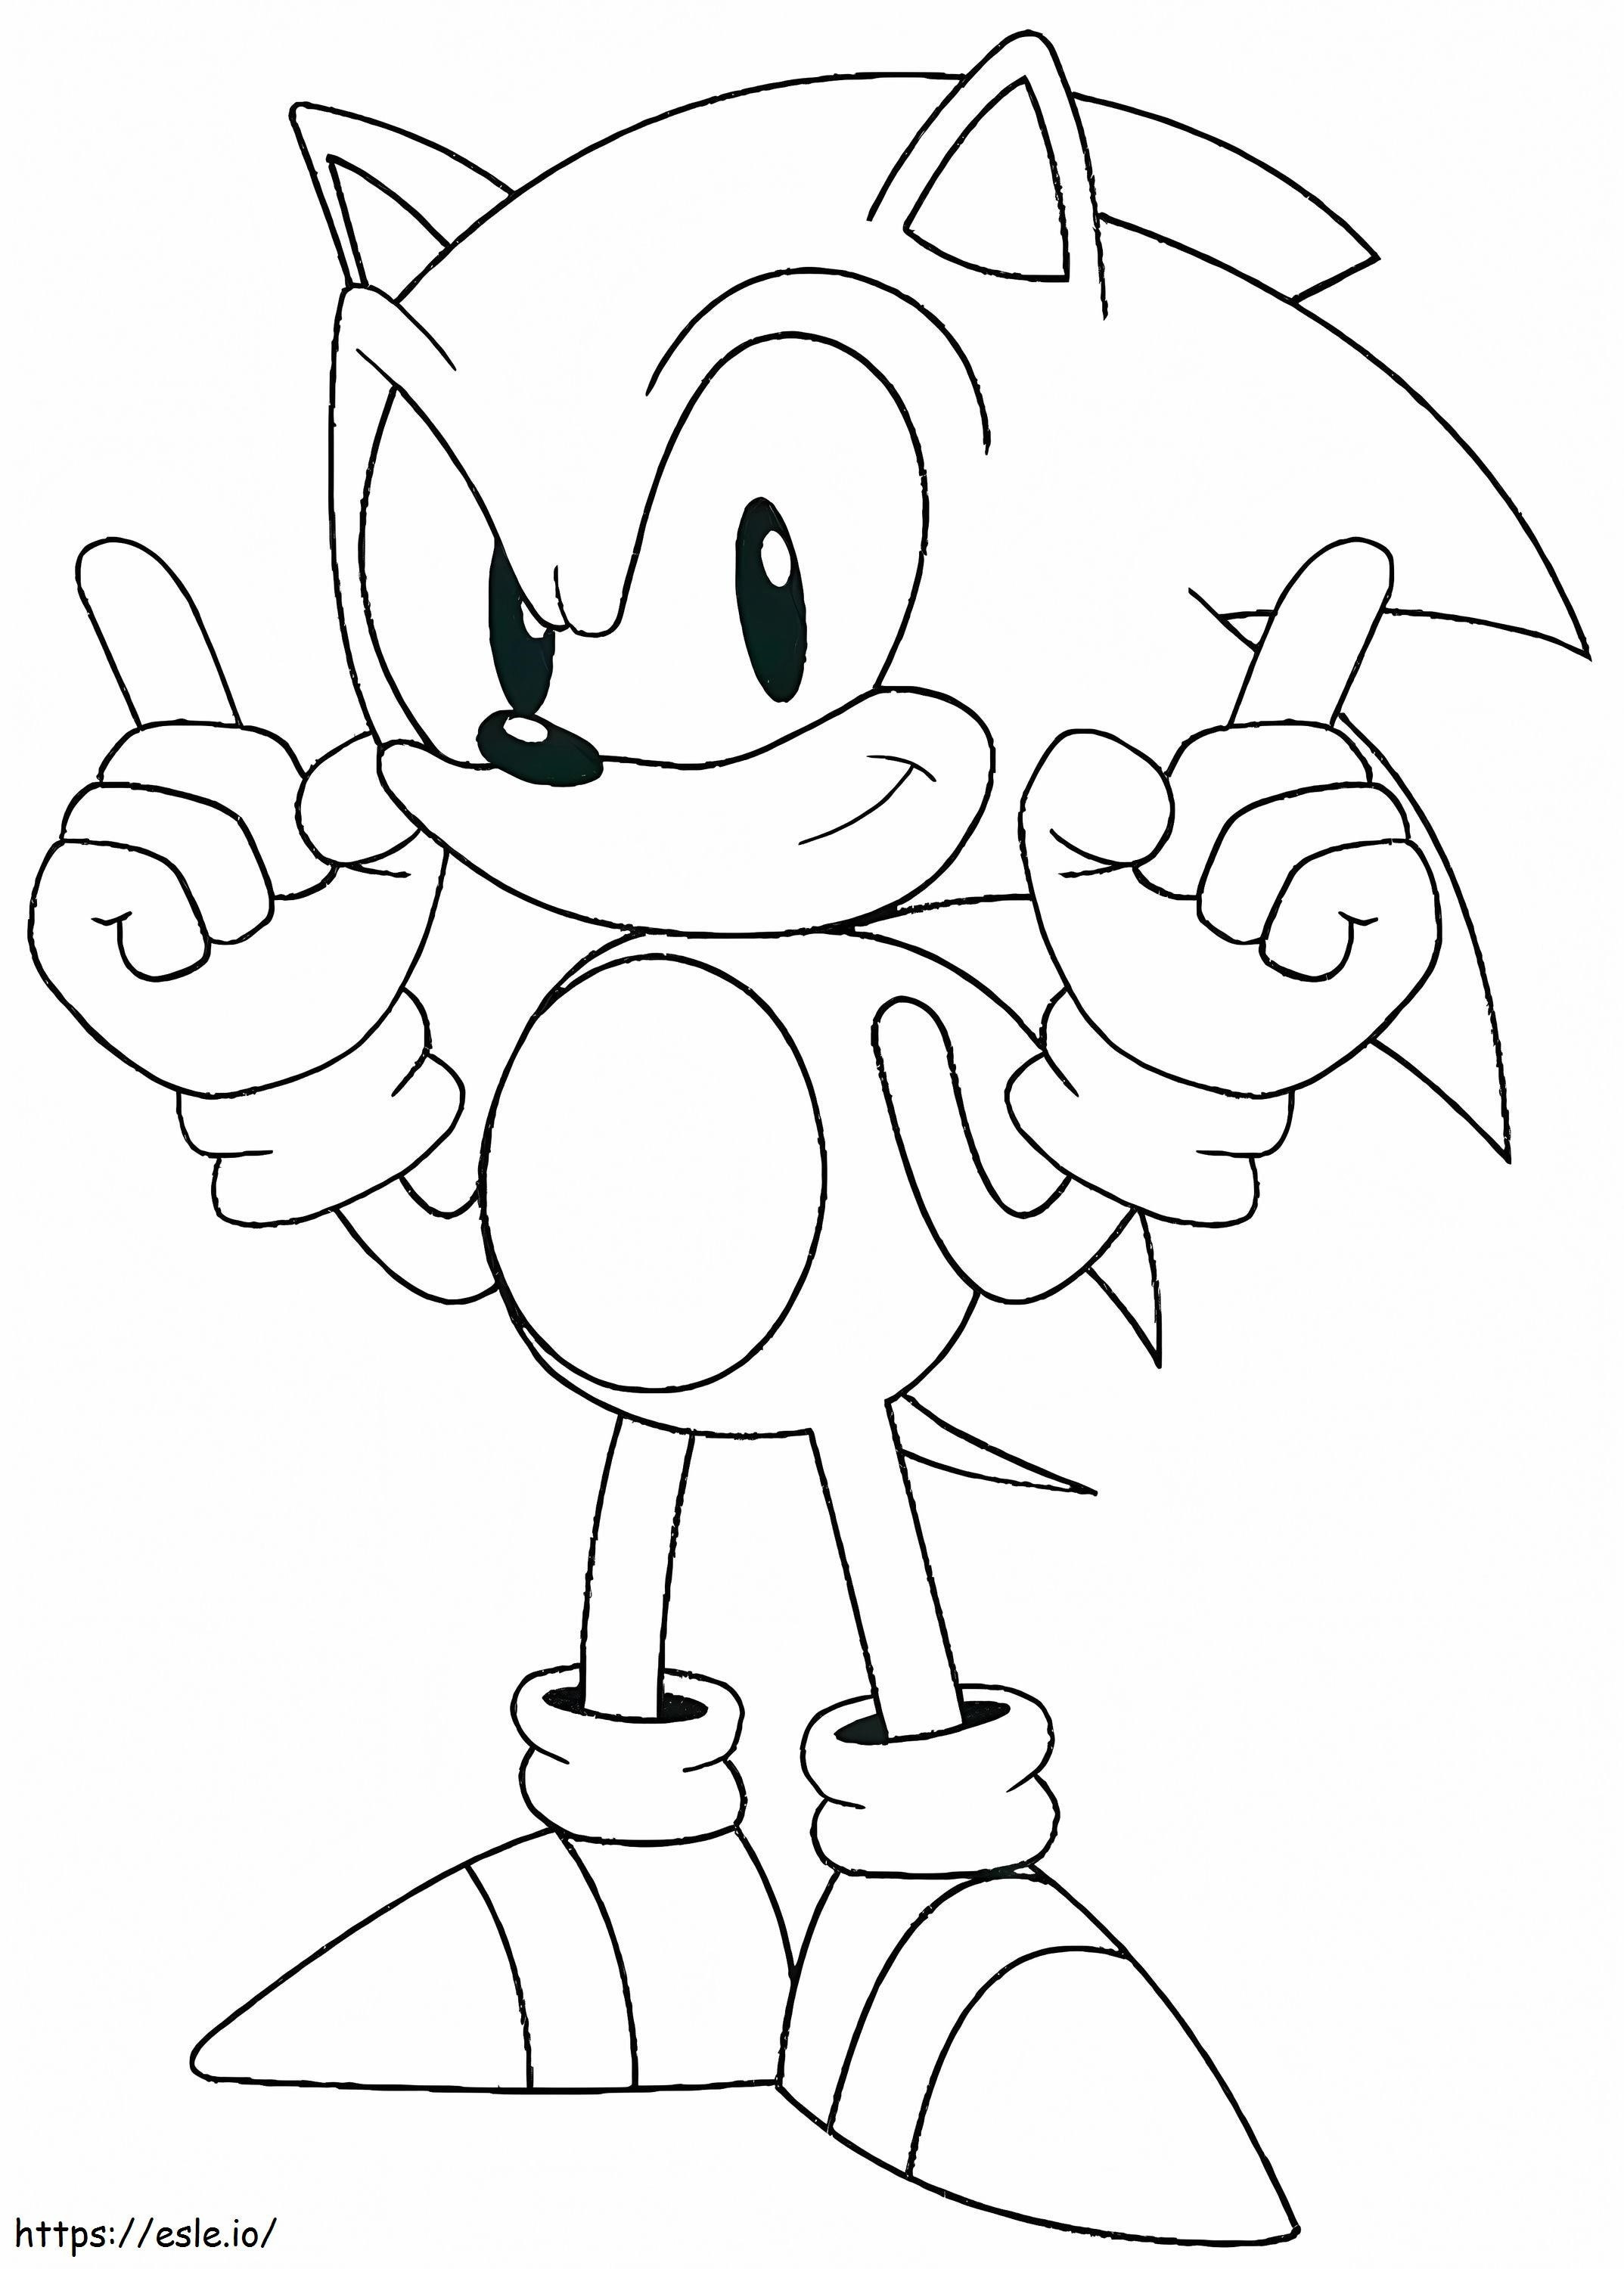 Free Sonic The Hedgehog coloring page